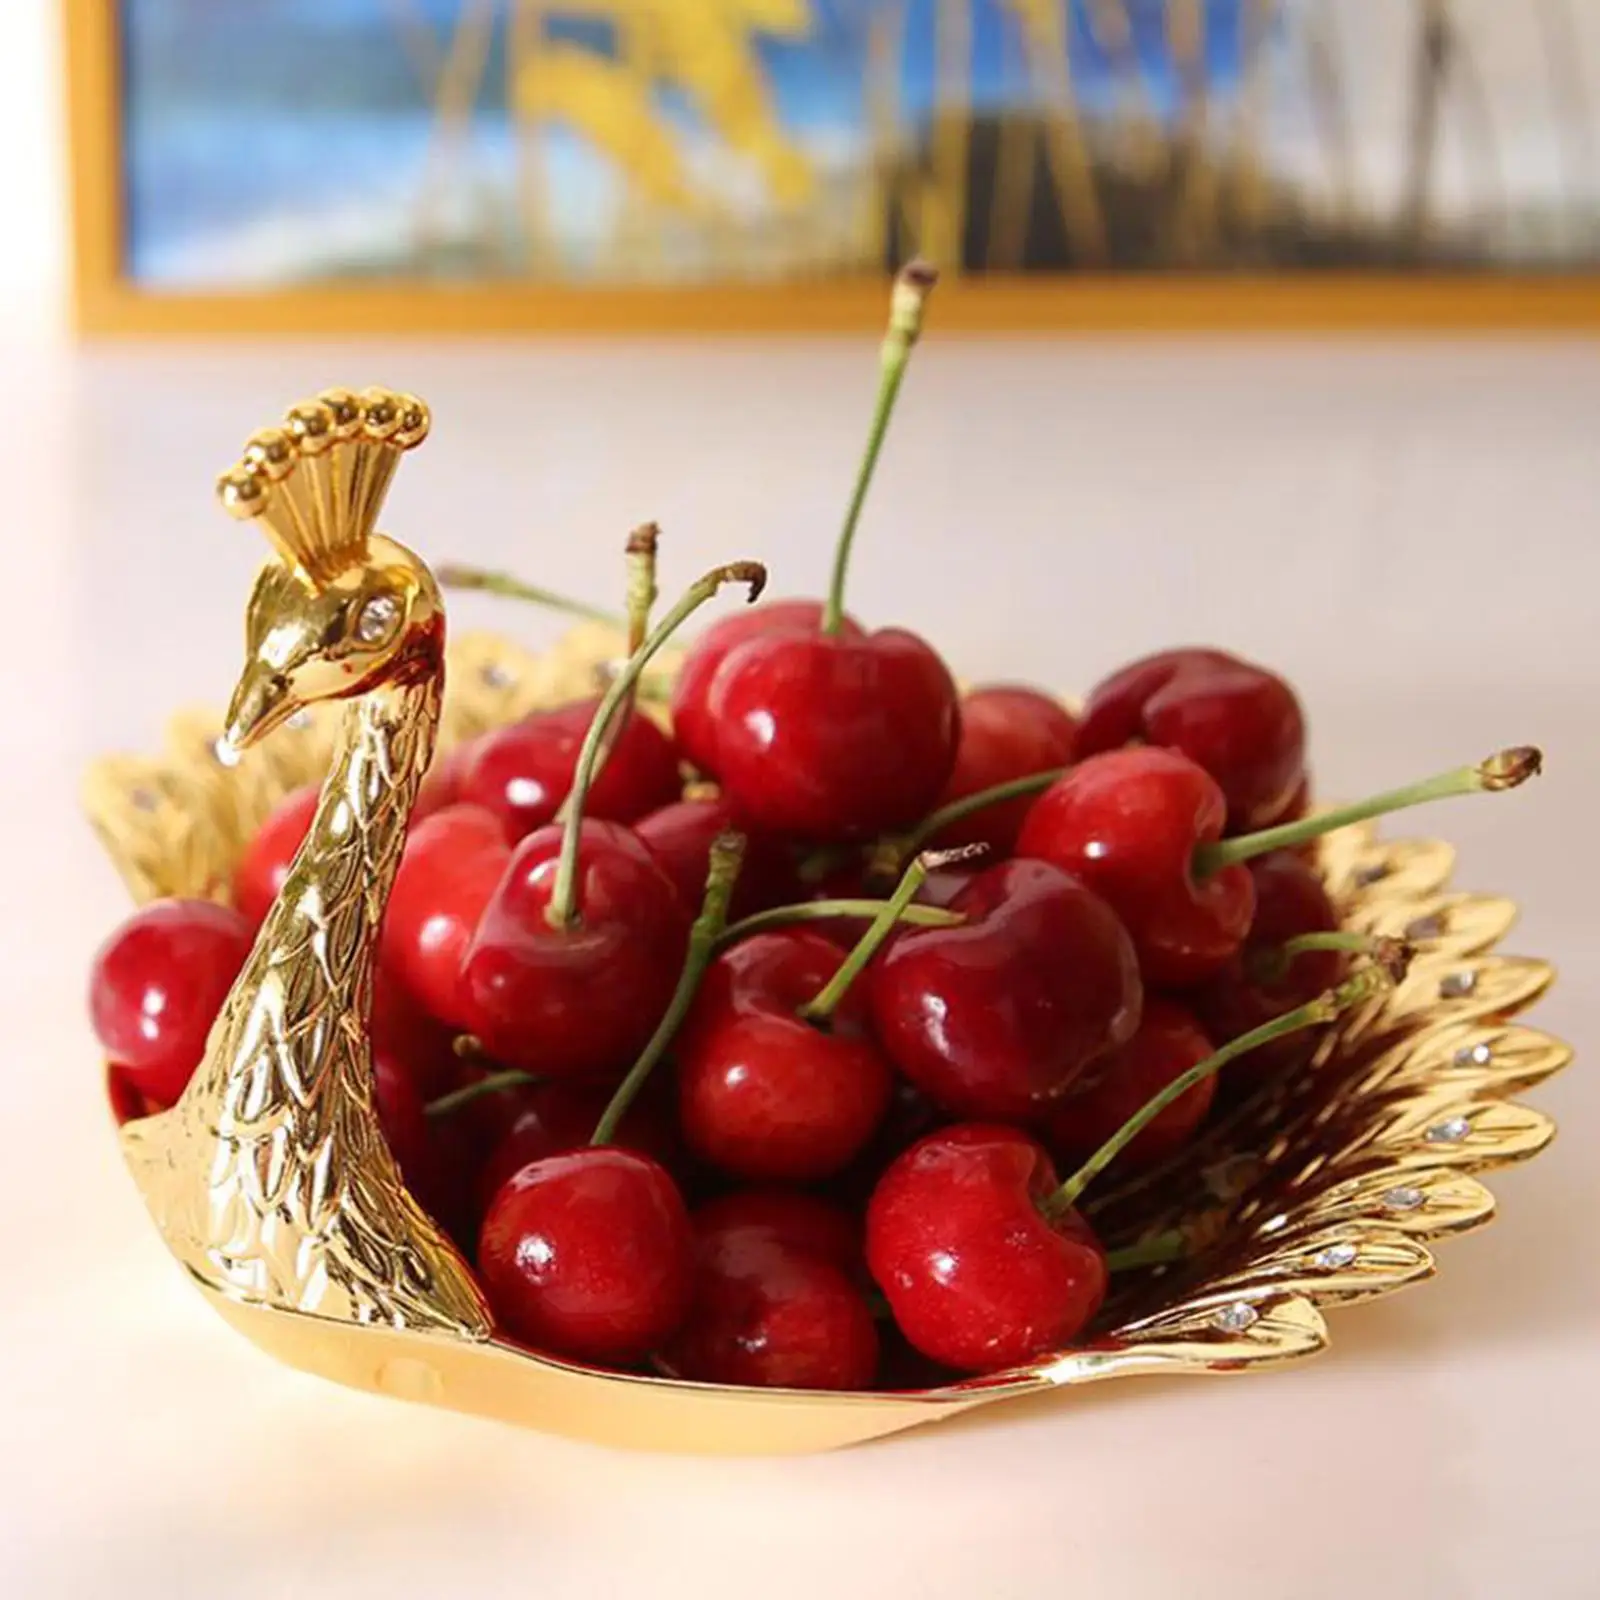 Gold Peacock Shape Fruit Plate Dessert Candy Snack Nut Serving Tray Dish